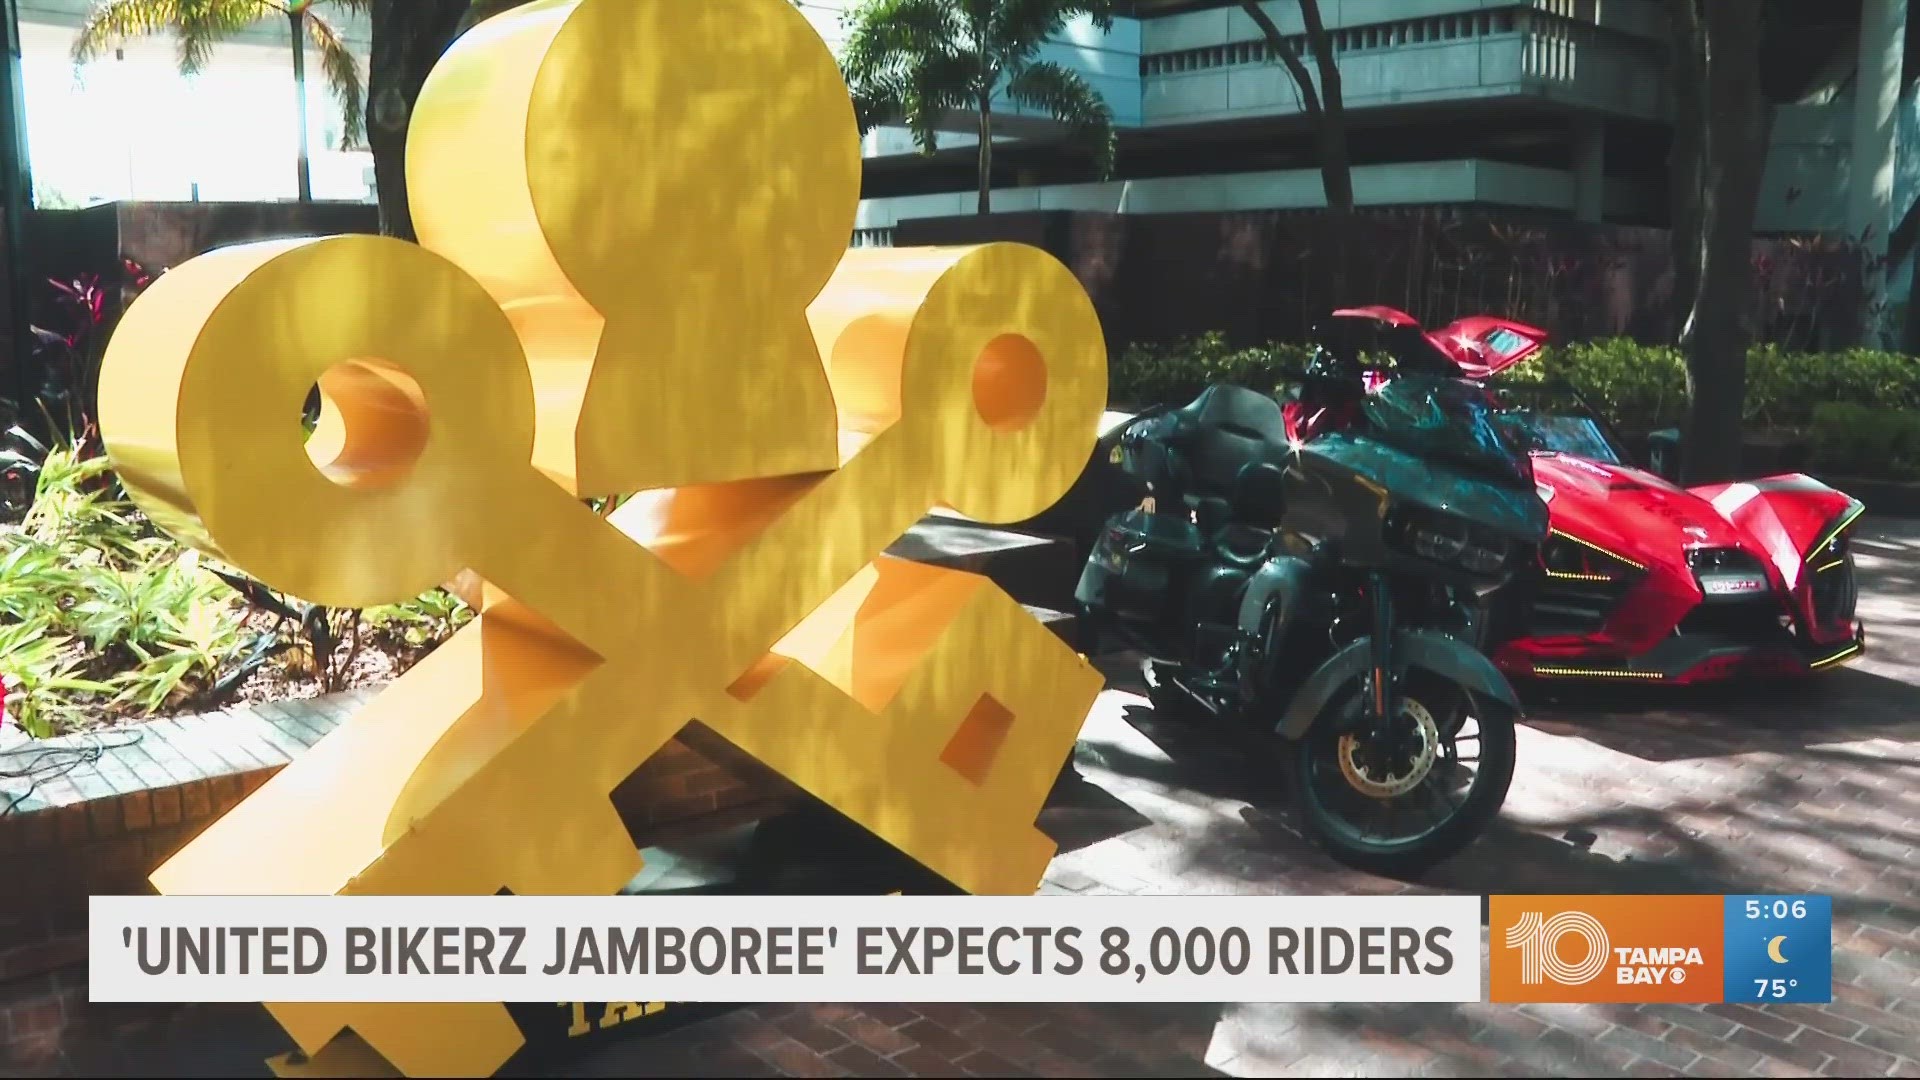 The event will run from May 23-28. United Bikerz is working with Visit Tampa Bay to put on the Jamboree.